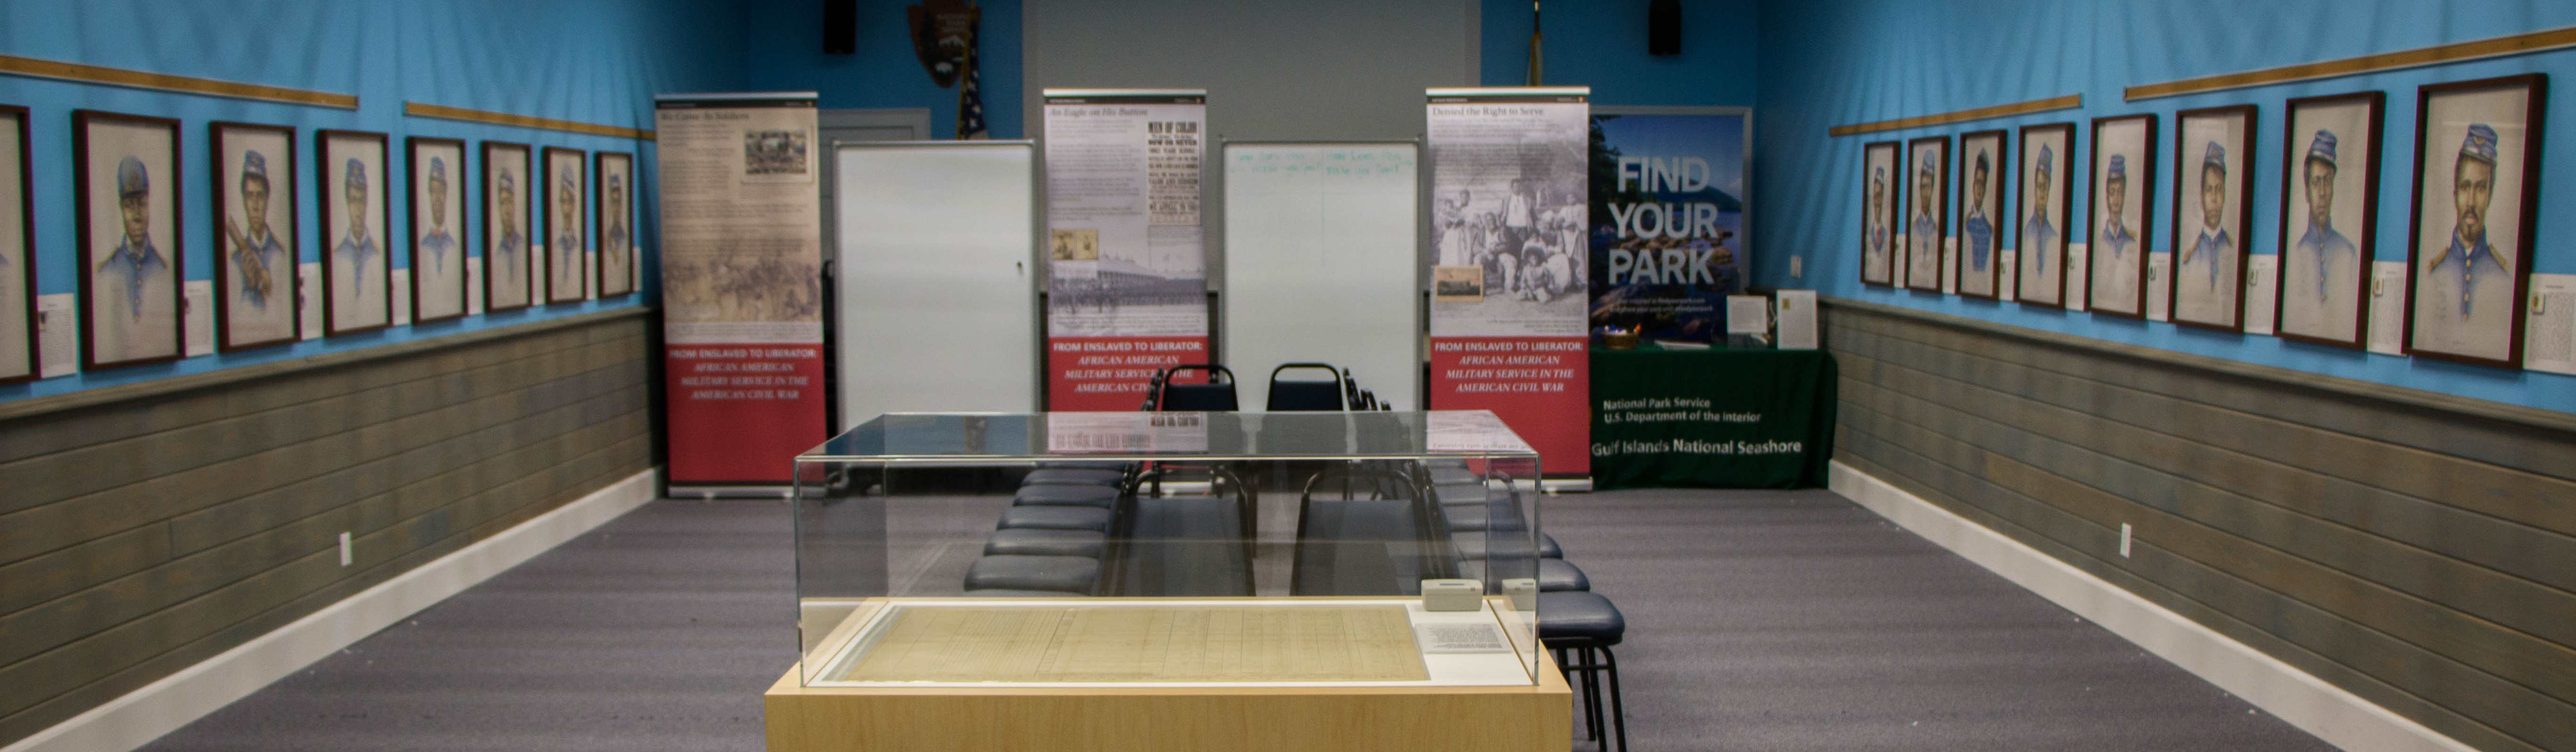 Hand drawn portraits line a blue room on either side, at the end of the room informational banners stand upright, and in the foreground an exhibit case holds a historic document.